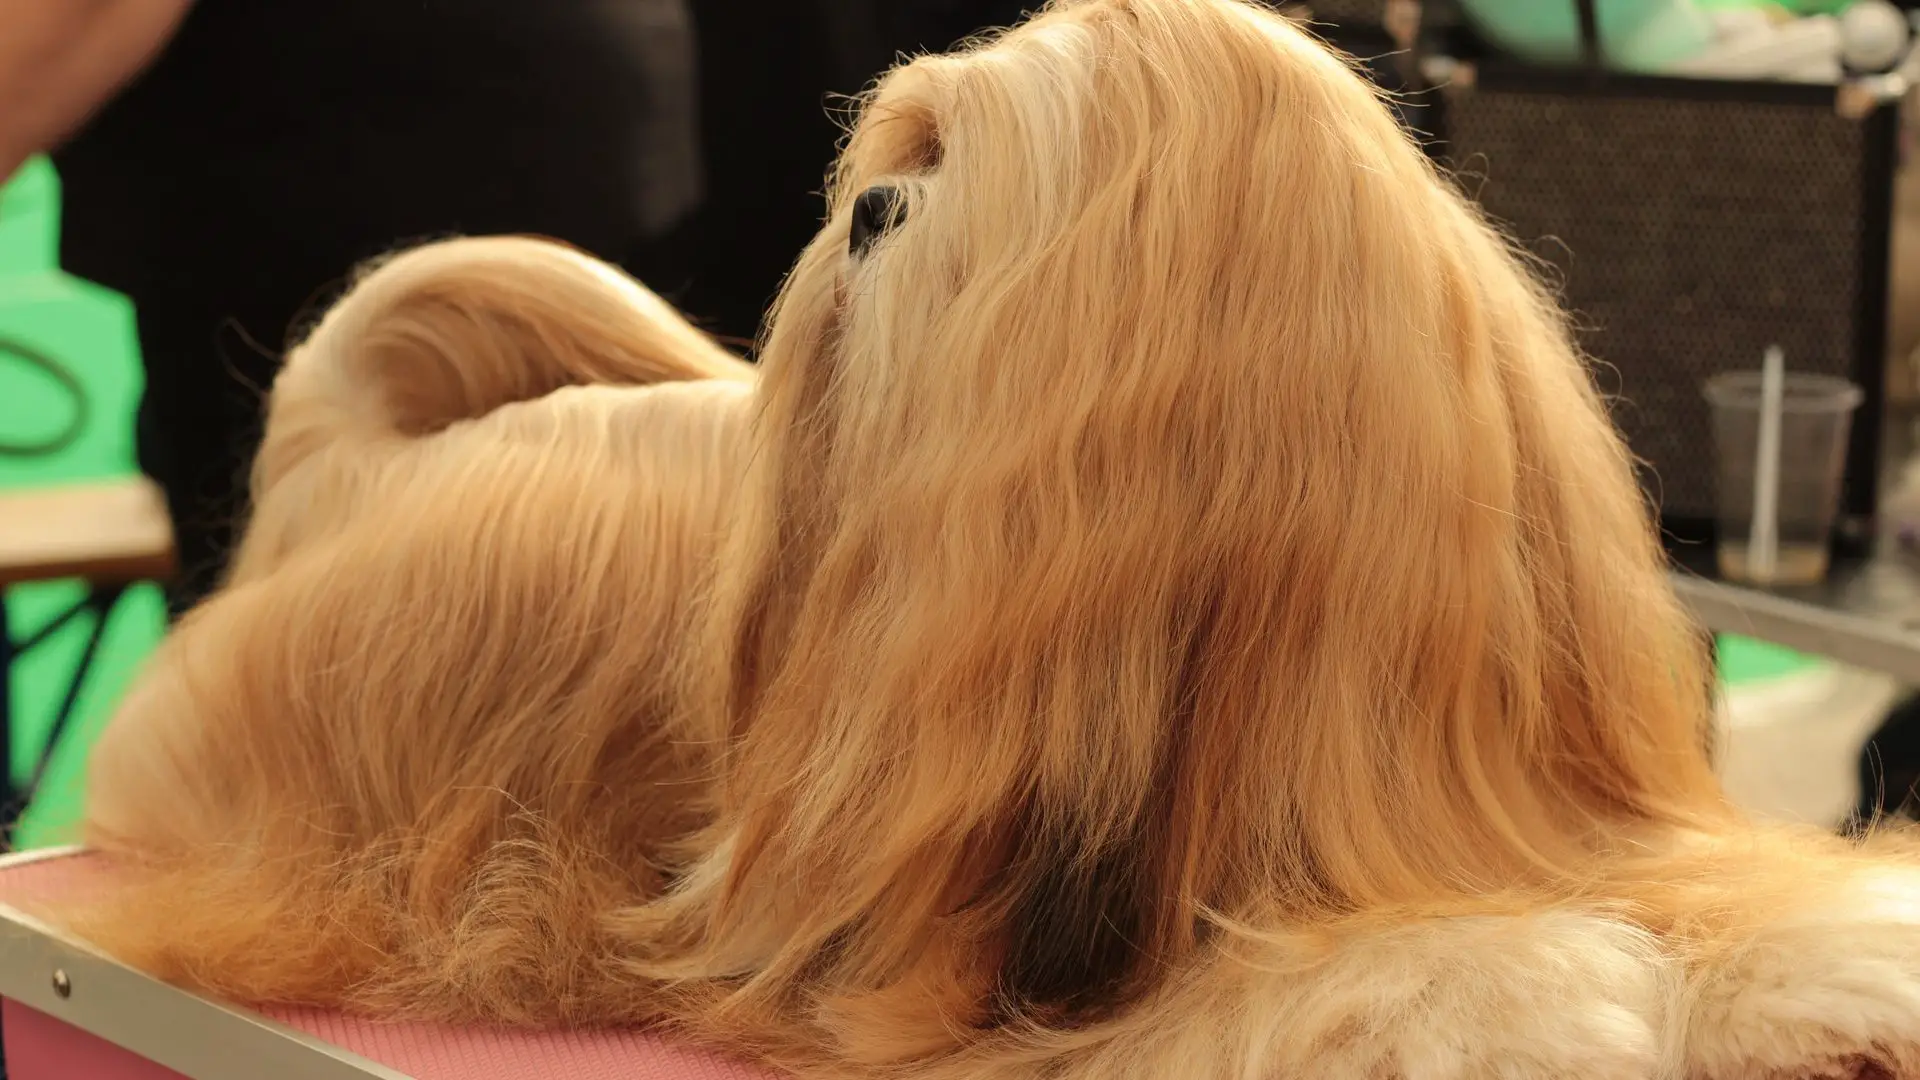 Long Haired Dog Breeds that Look Like Style Icons! |